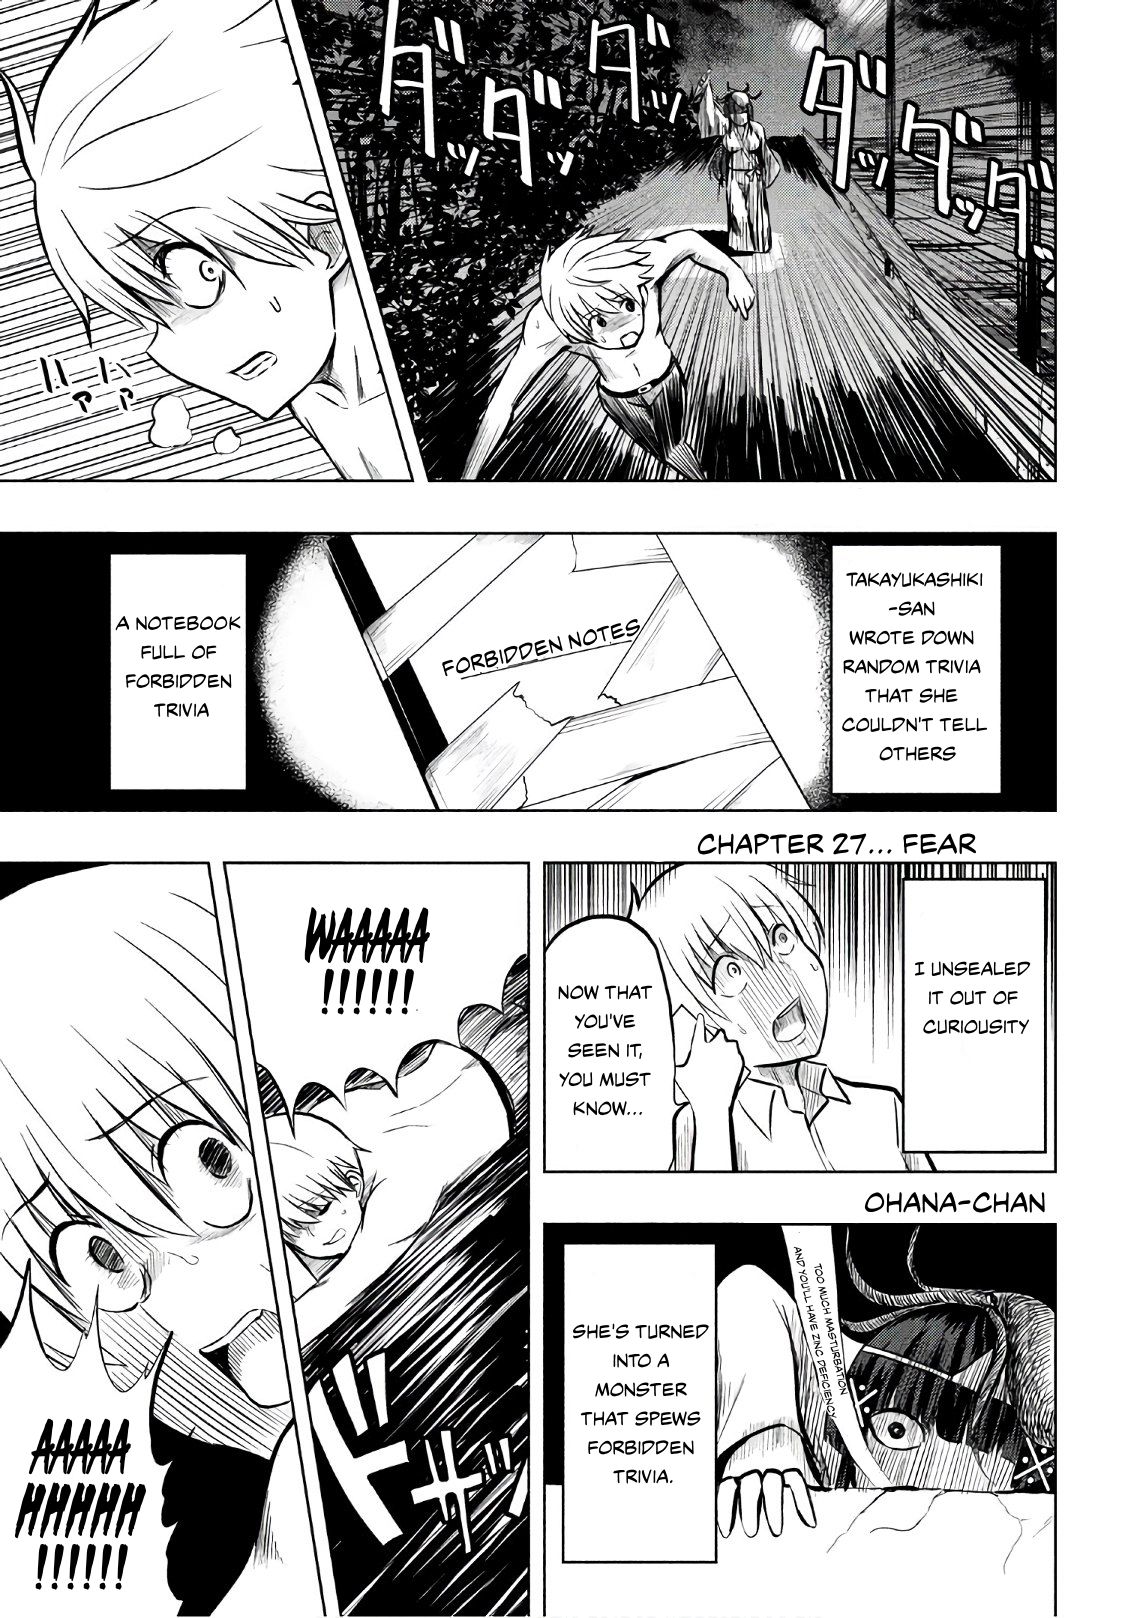 A Girl Who Is Very Well-Informed About Weird Knowledge, Takayukashiki Souko-San Chapter 27: Fear - Picture 1